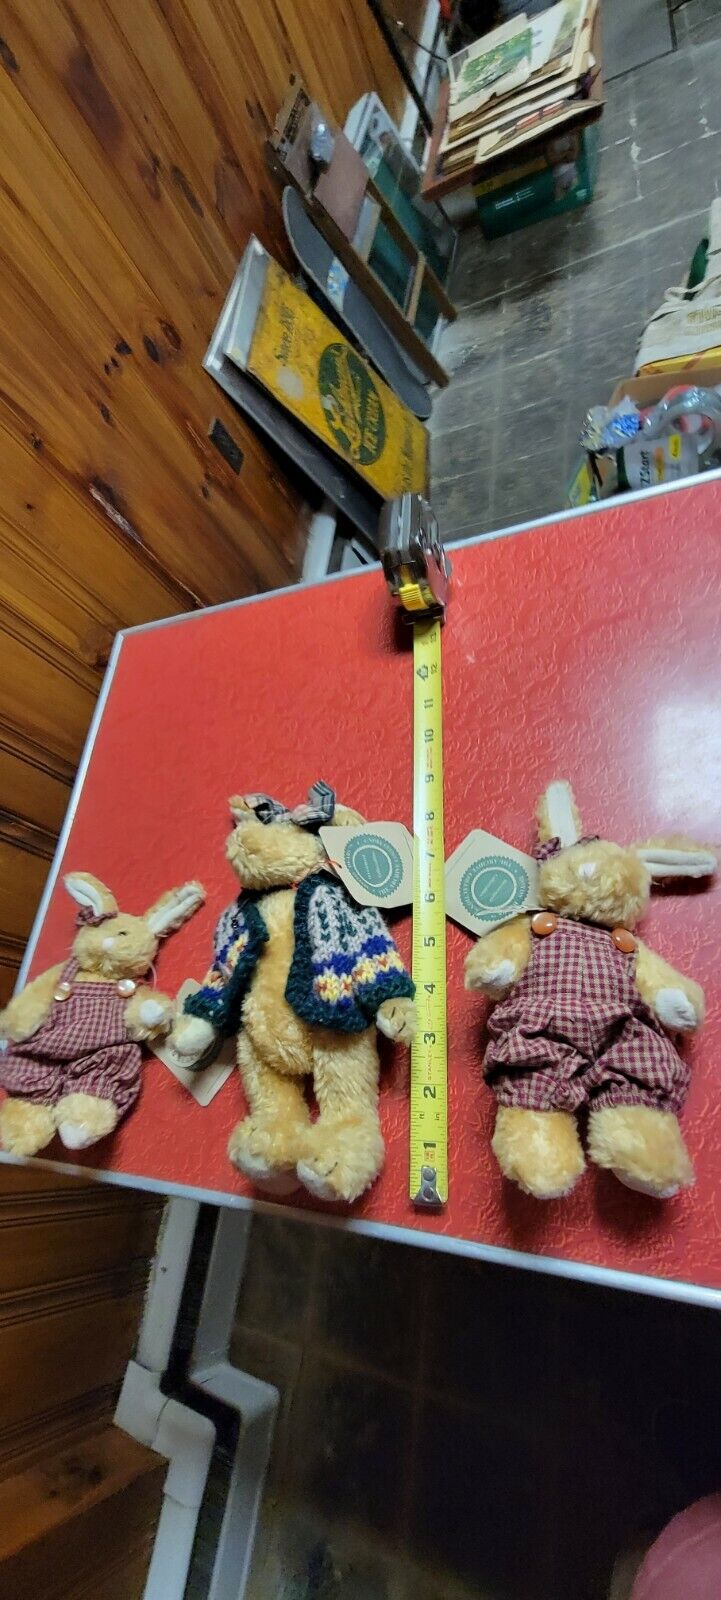 3 nice boyds bears small jointed bunny rabbit toy doll lot with tags